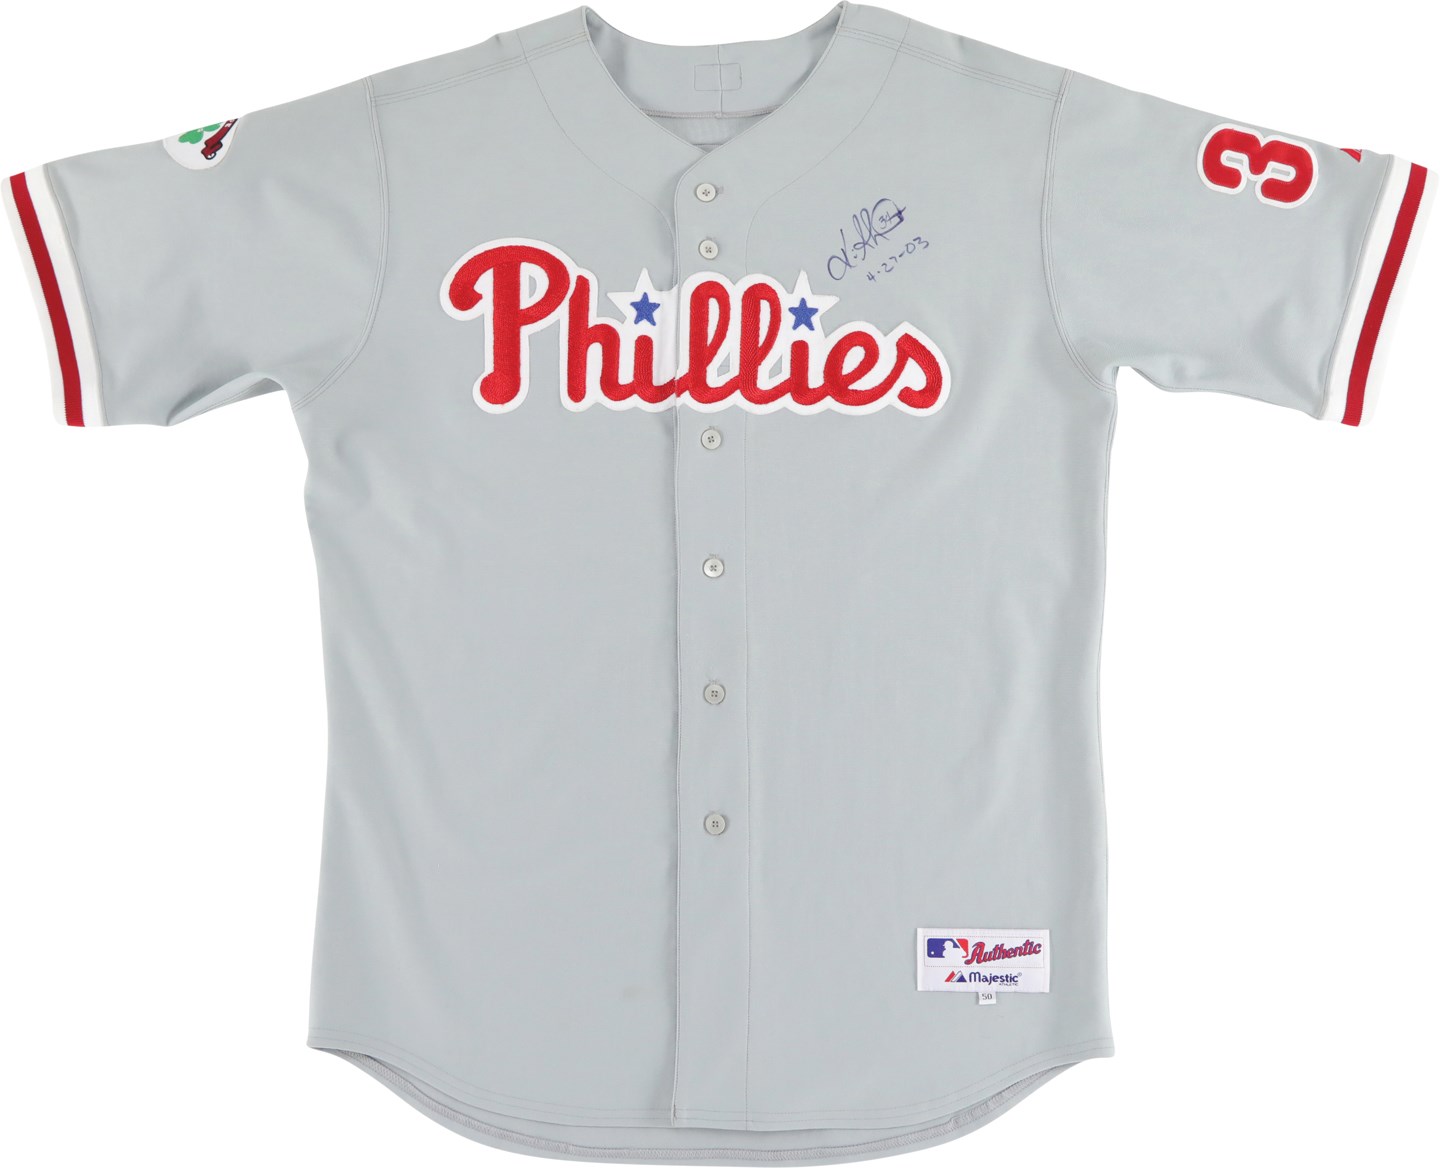 Baseball Equipment - 2004 Kevin Millwood Philadelphia Phillies Signed Game Worn Jersey with Tug/Pope Patch (LOA)